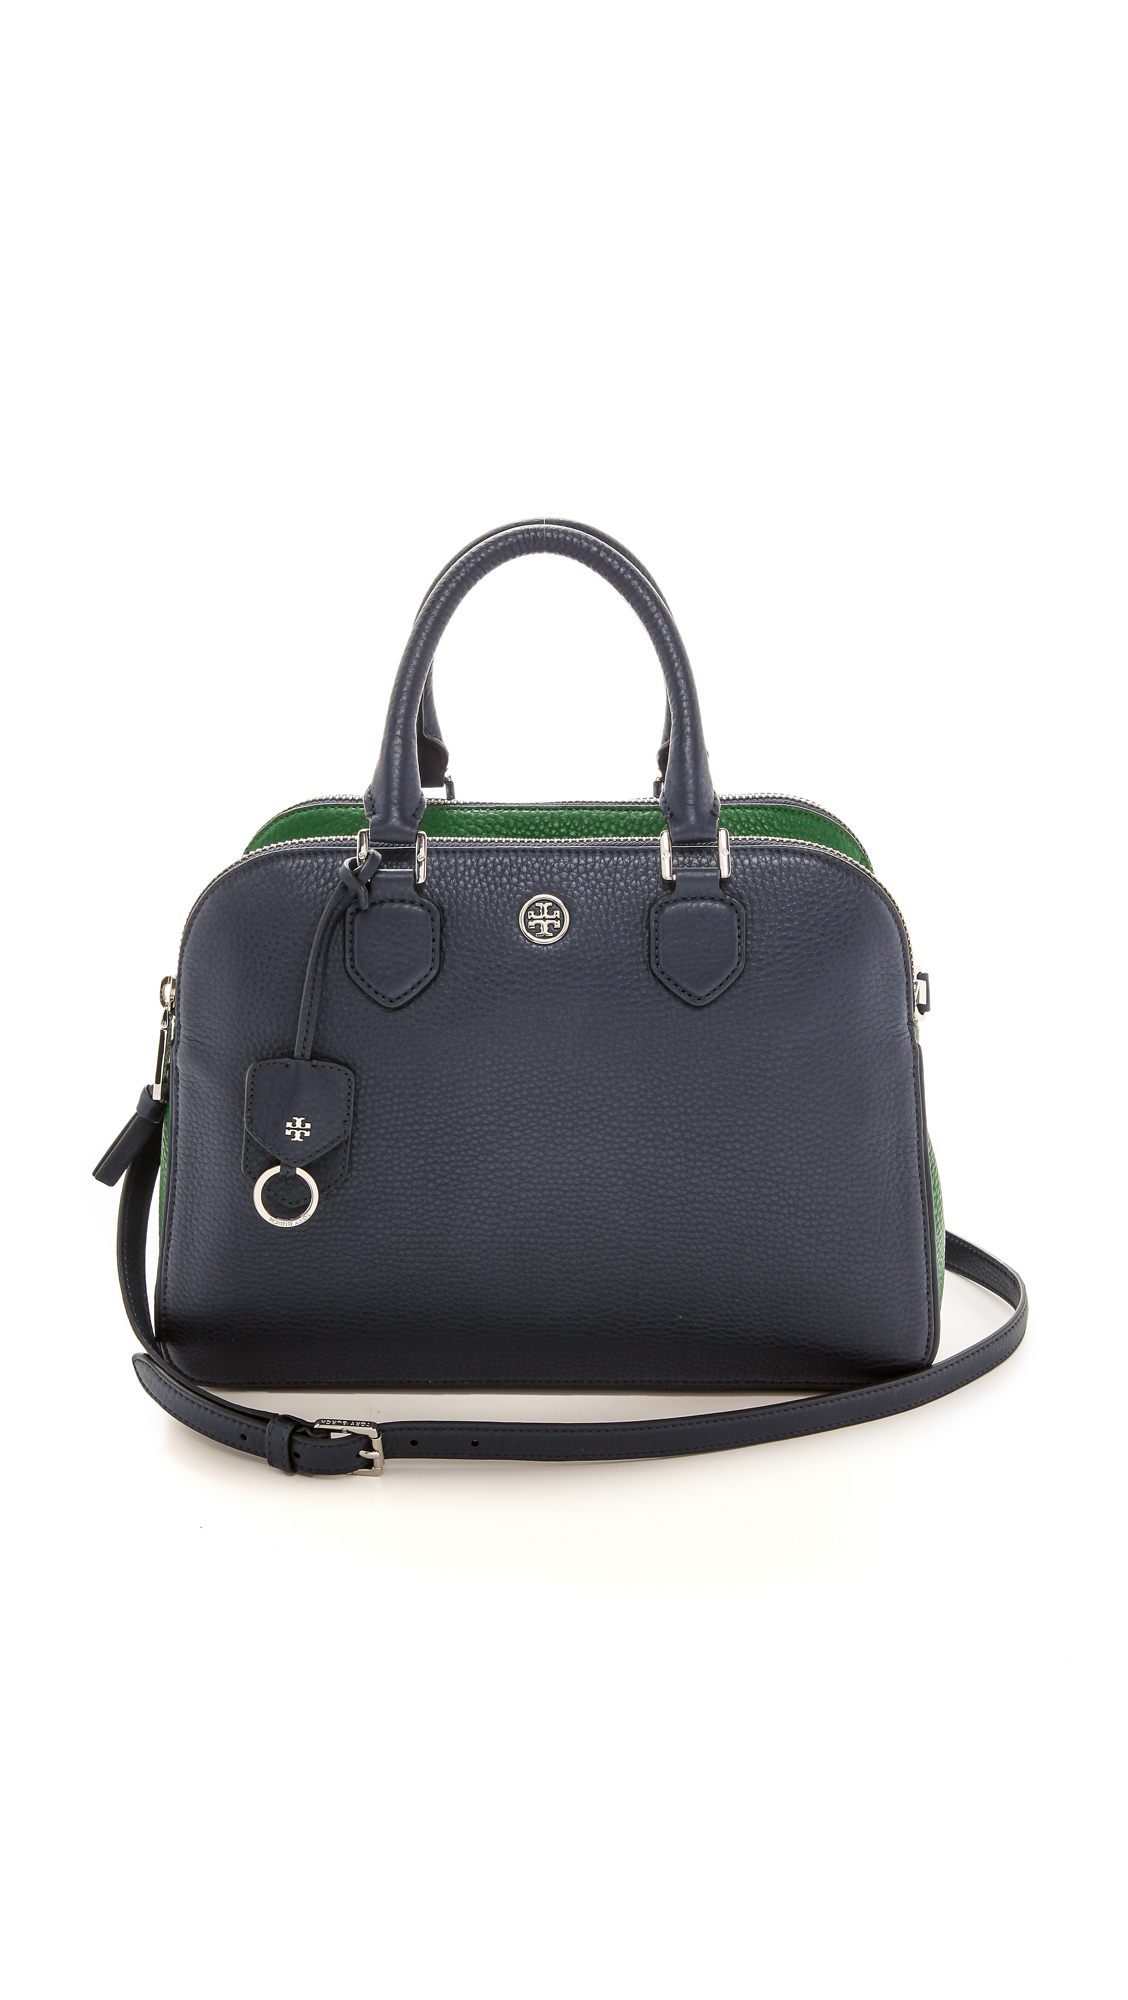 Tory Burch Robinson Pebbled Open Dome Satchel